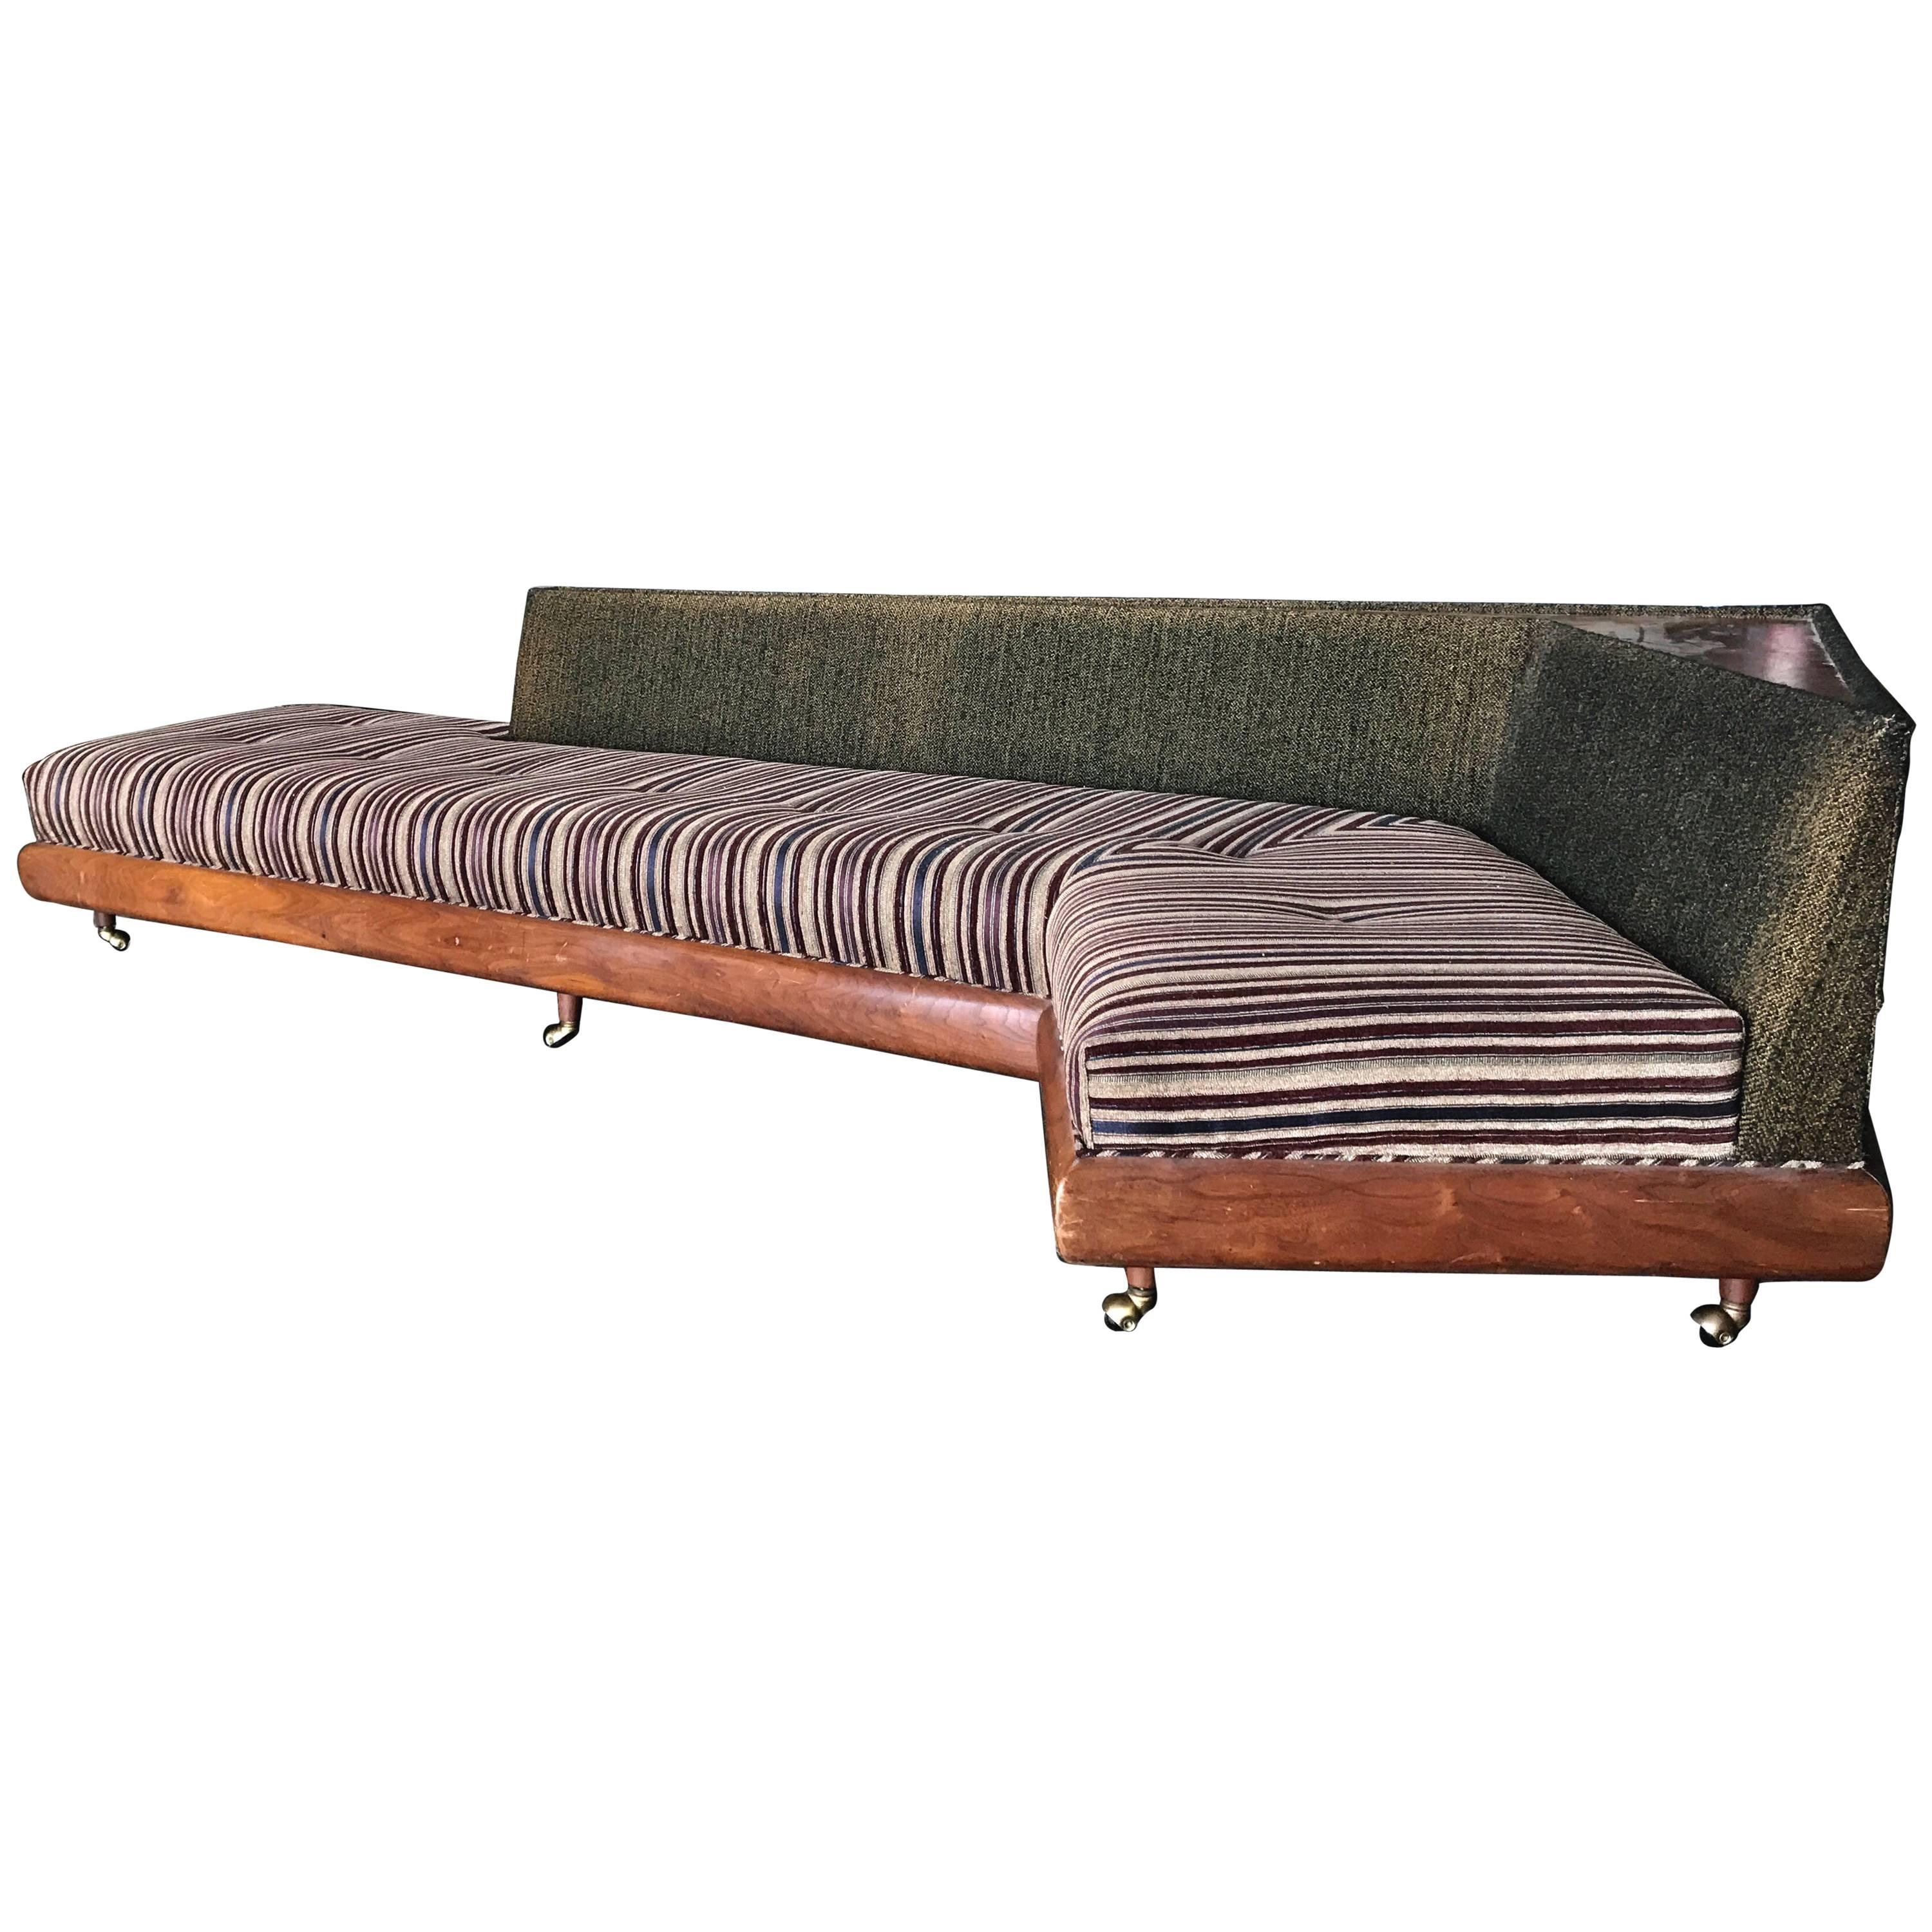 Classic Modernist "Boomerang" Sofa with Built in Table by Adrian Pearsall